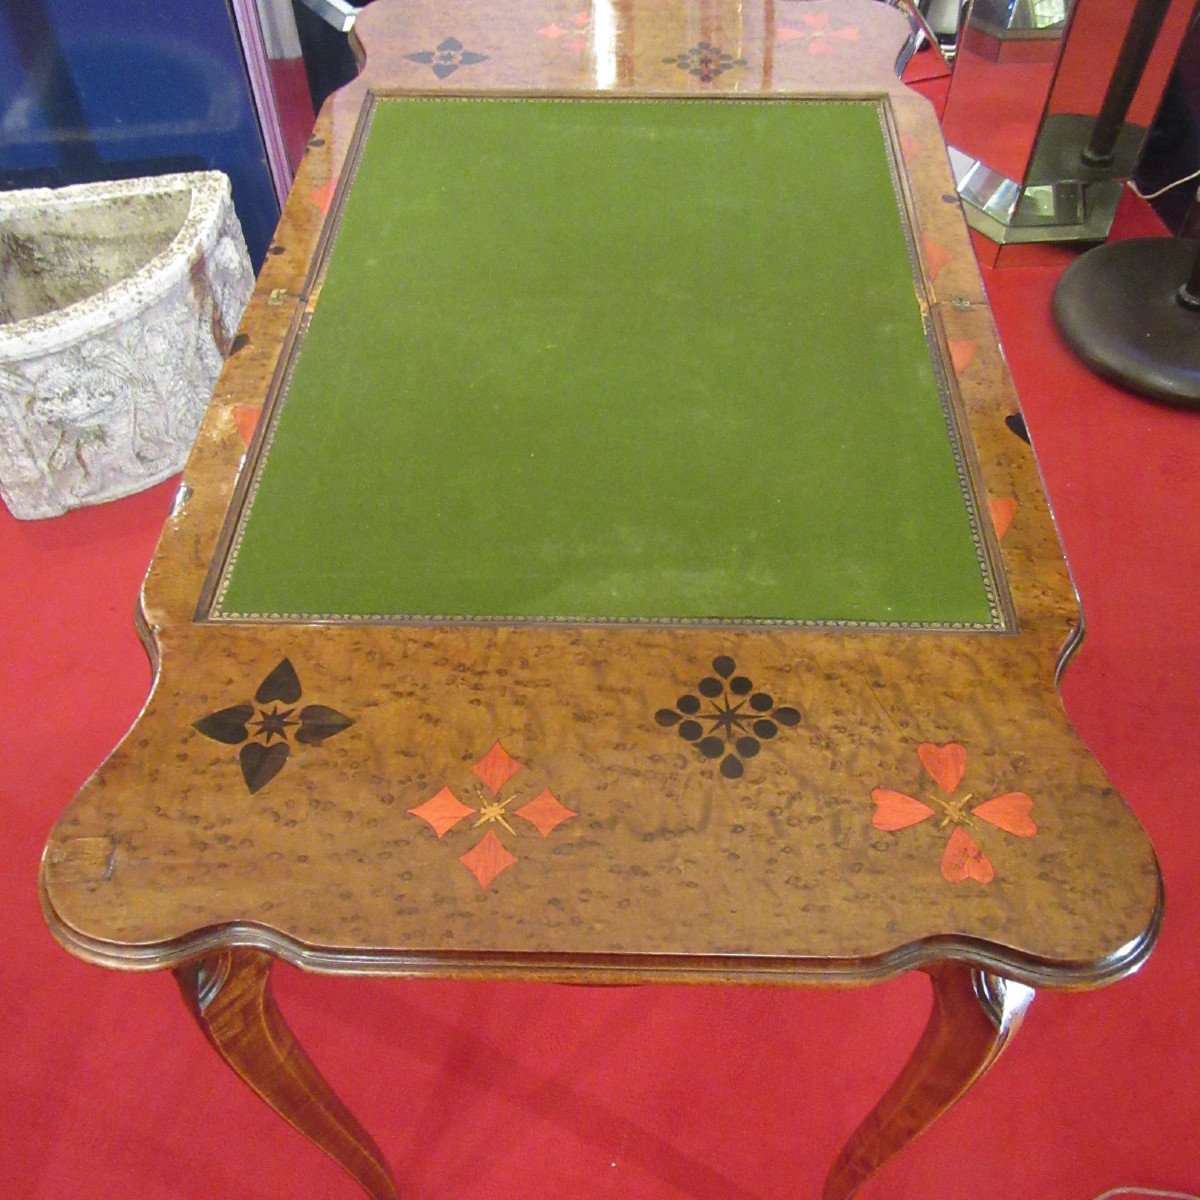 Games Table Signed Gallé In Rosewood In Excellent Condition. Art Nouveau Period-photo-6